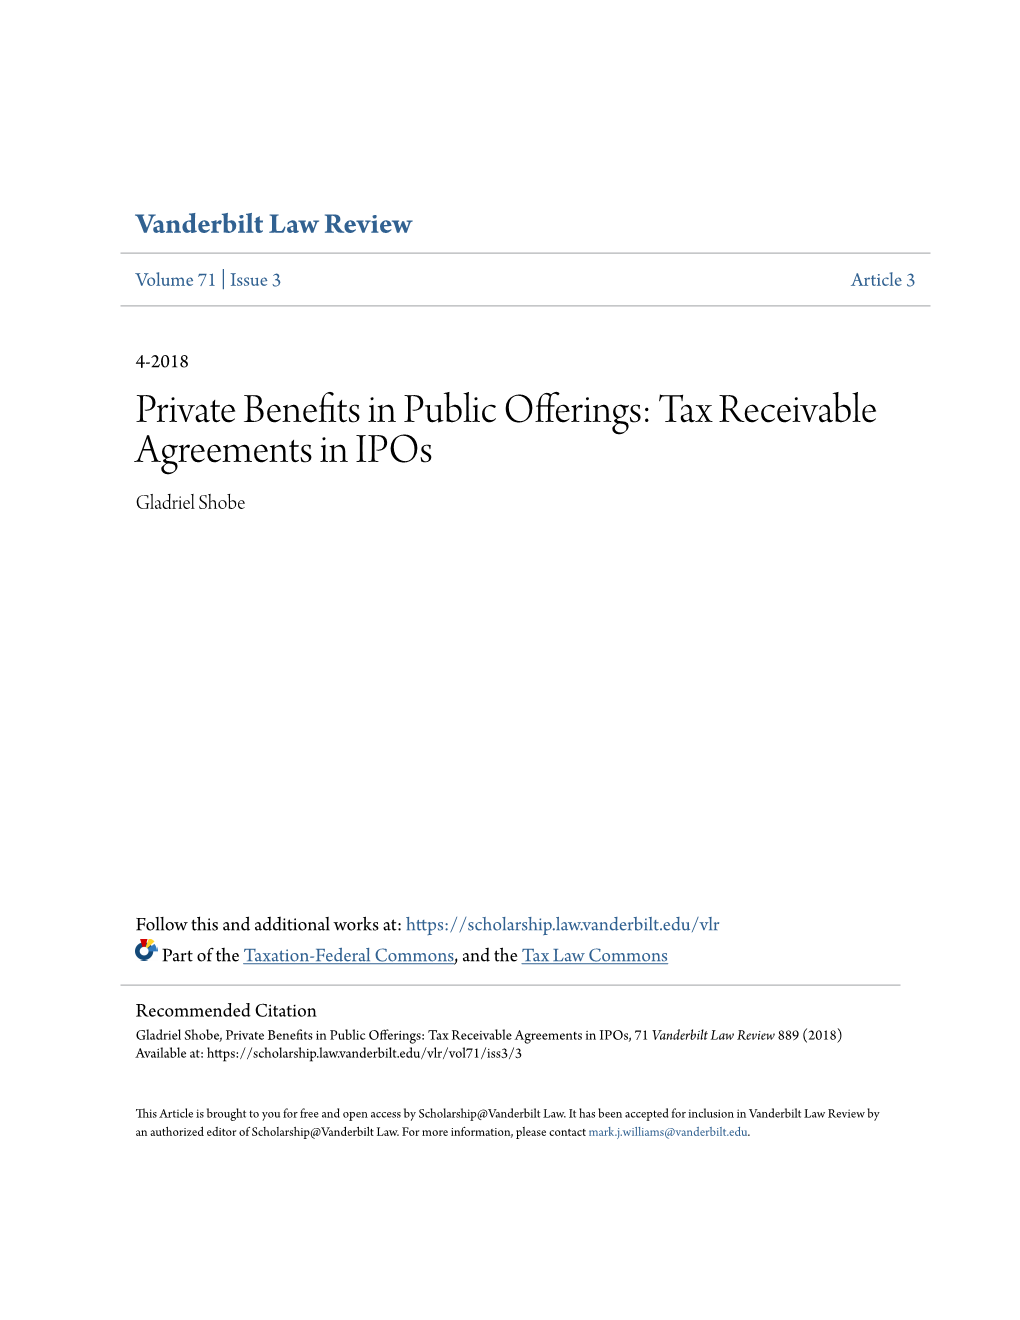 Tax Receivable Agreements in Ipos Gladriel Shobe